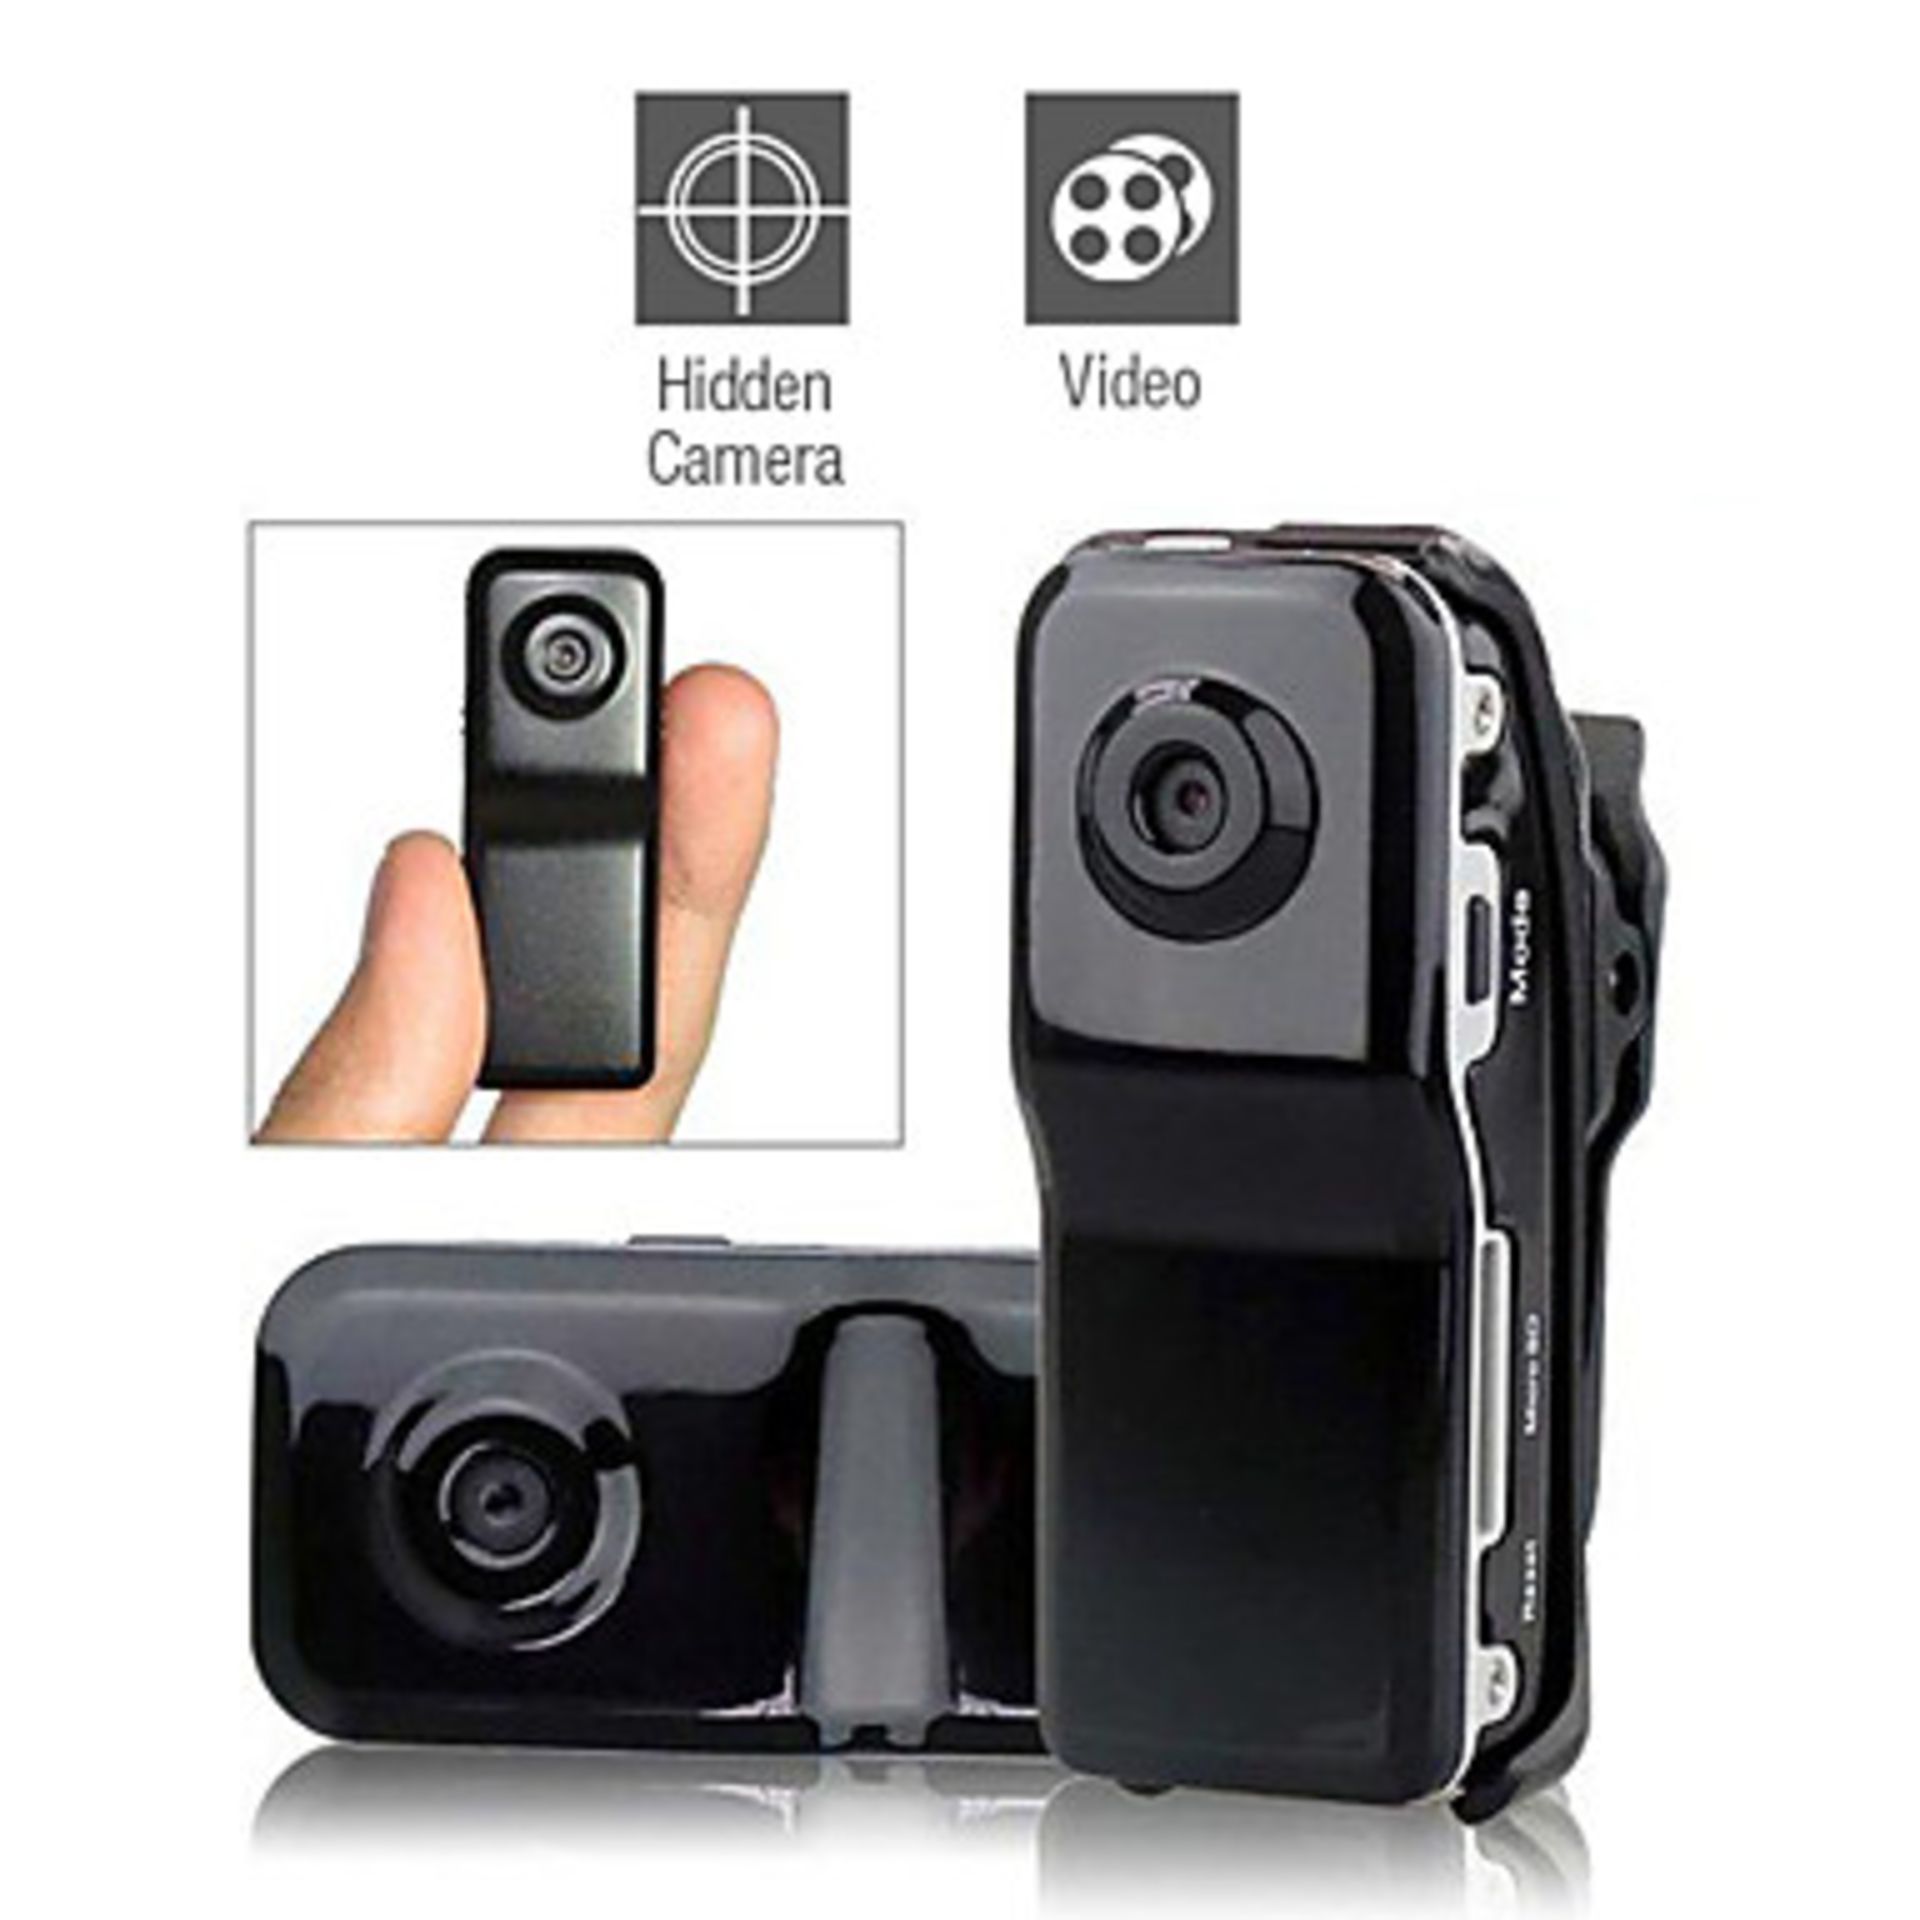 V *TRADE QTY* Brand New Mini Action Camera With Voice Recorder - 3 Mounts Plus Gel Case - Charger